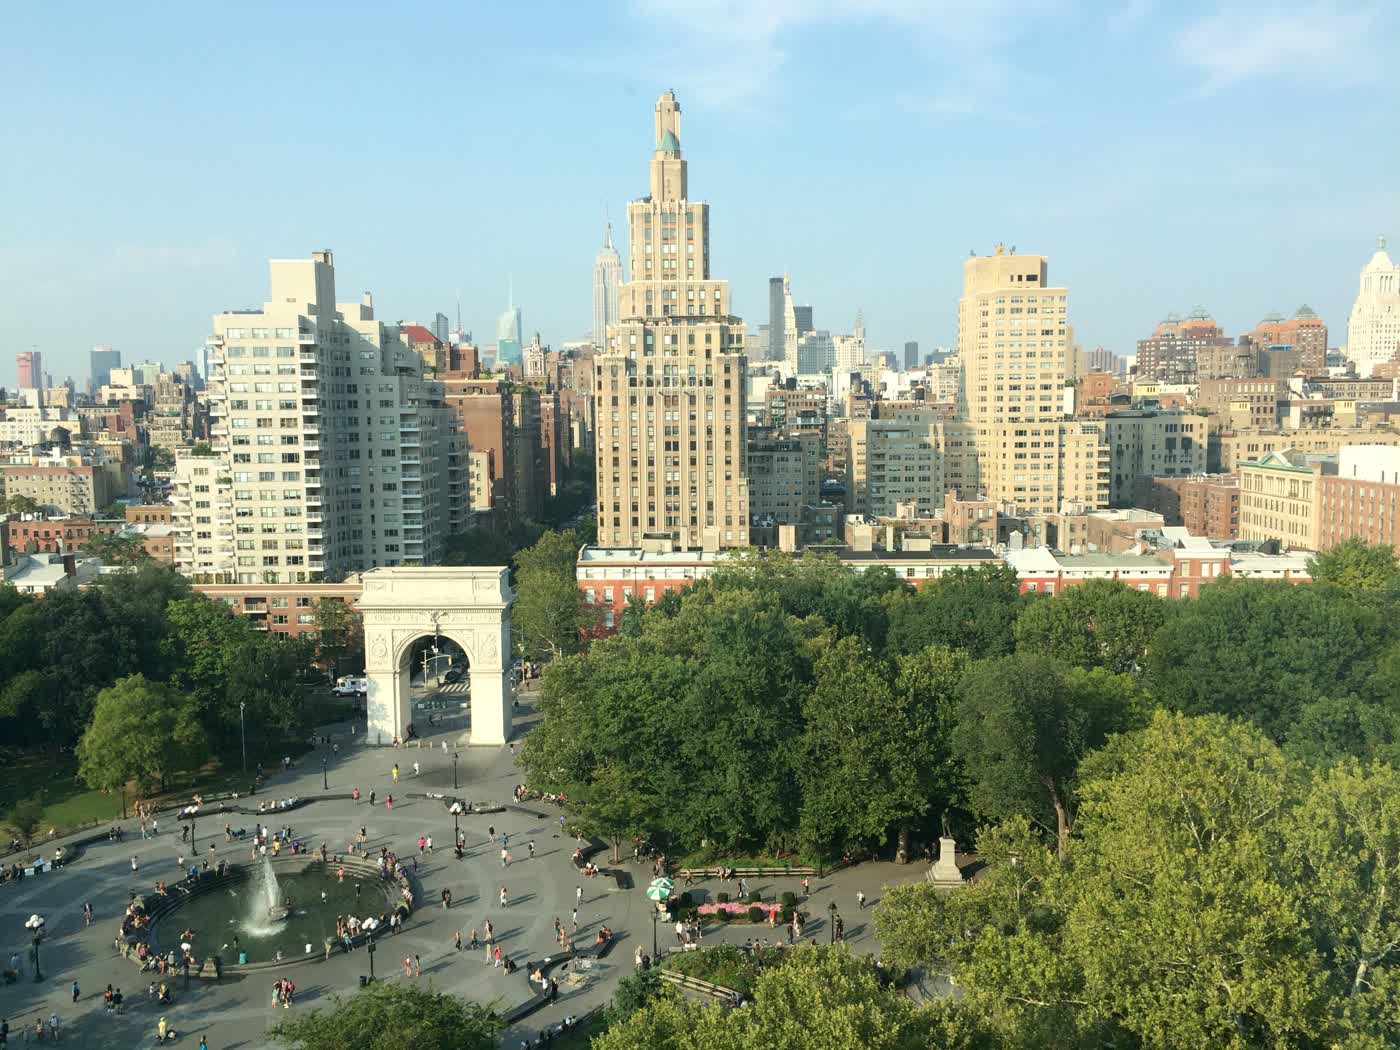 Washington Square Park seen from above.